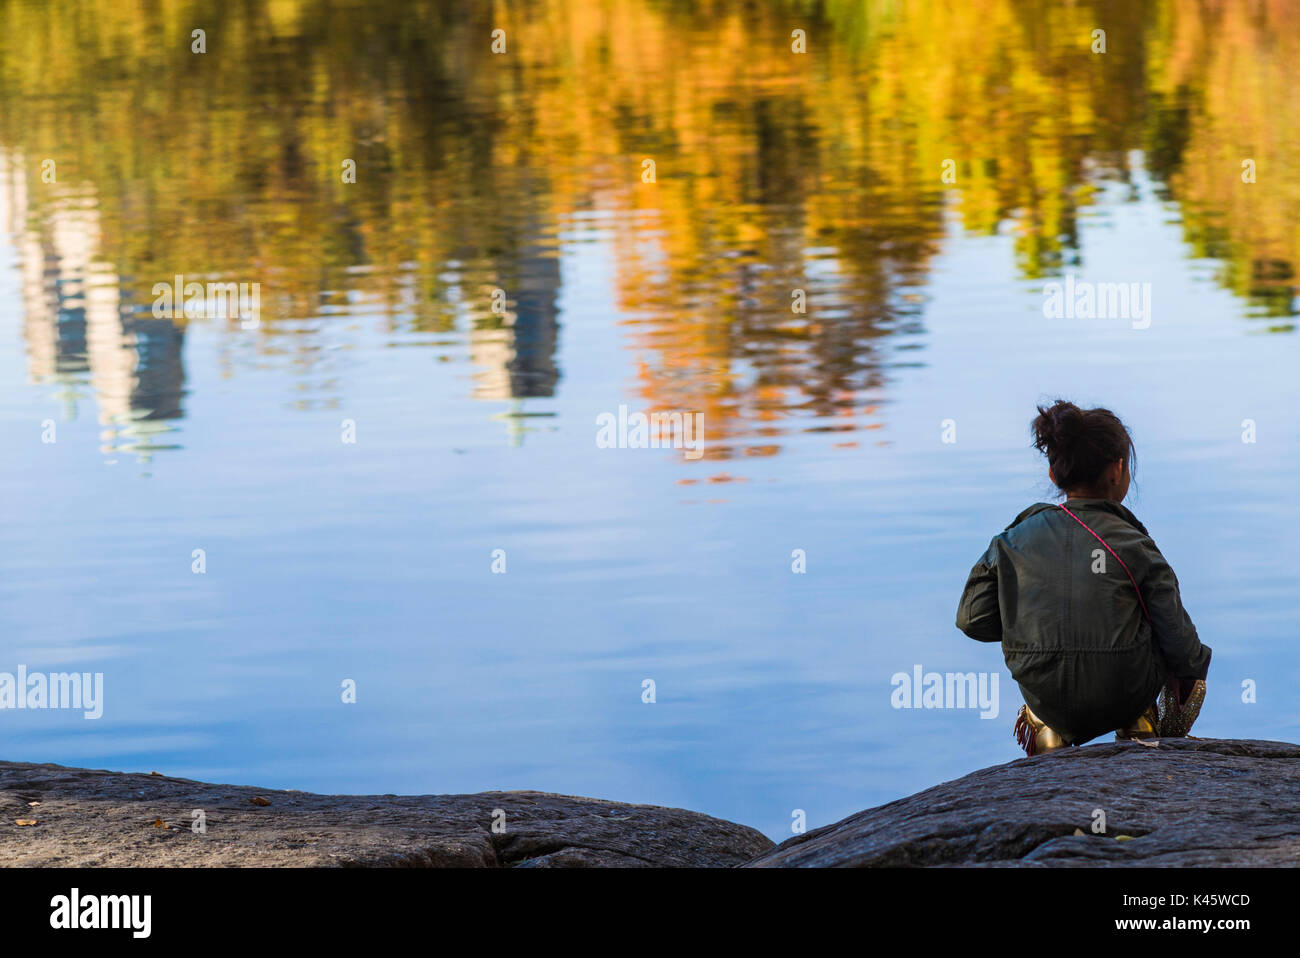 USA, New York, New York City, Central Park, children by The Pond, autumn Stock Photo